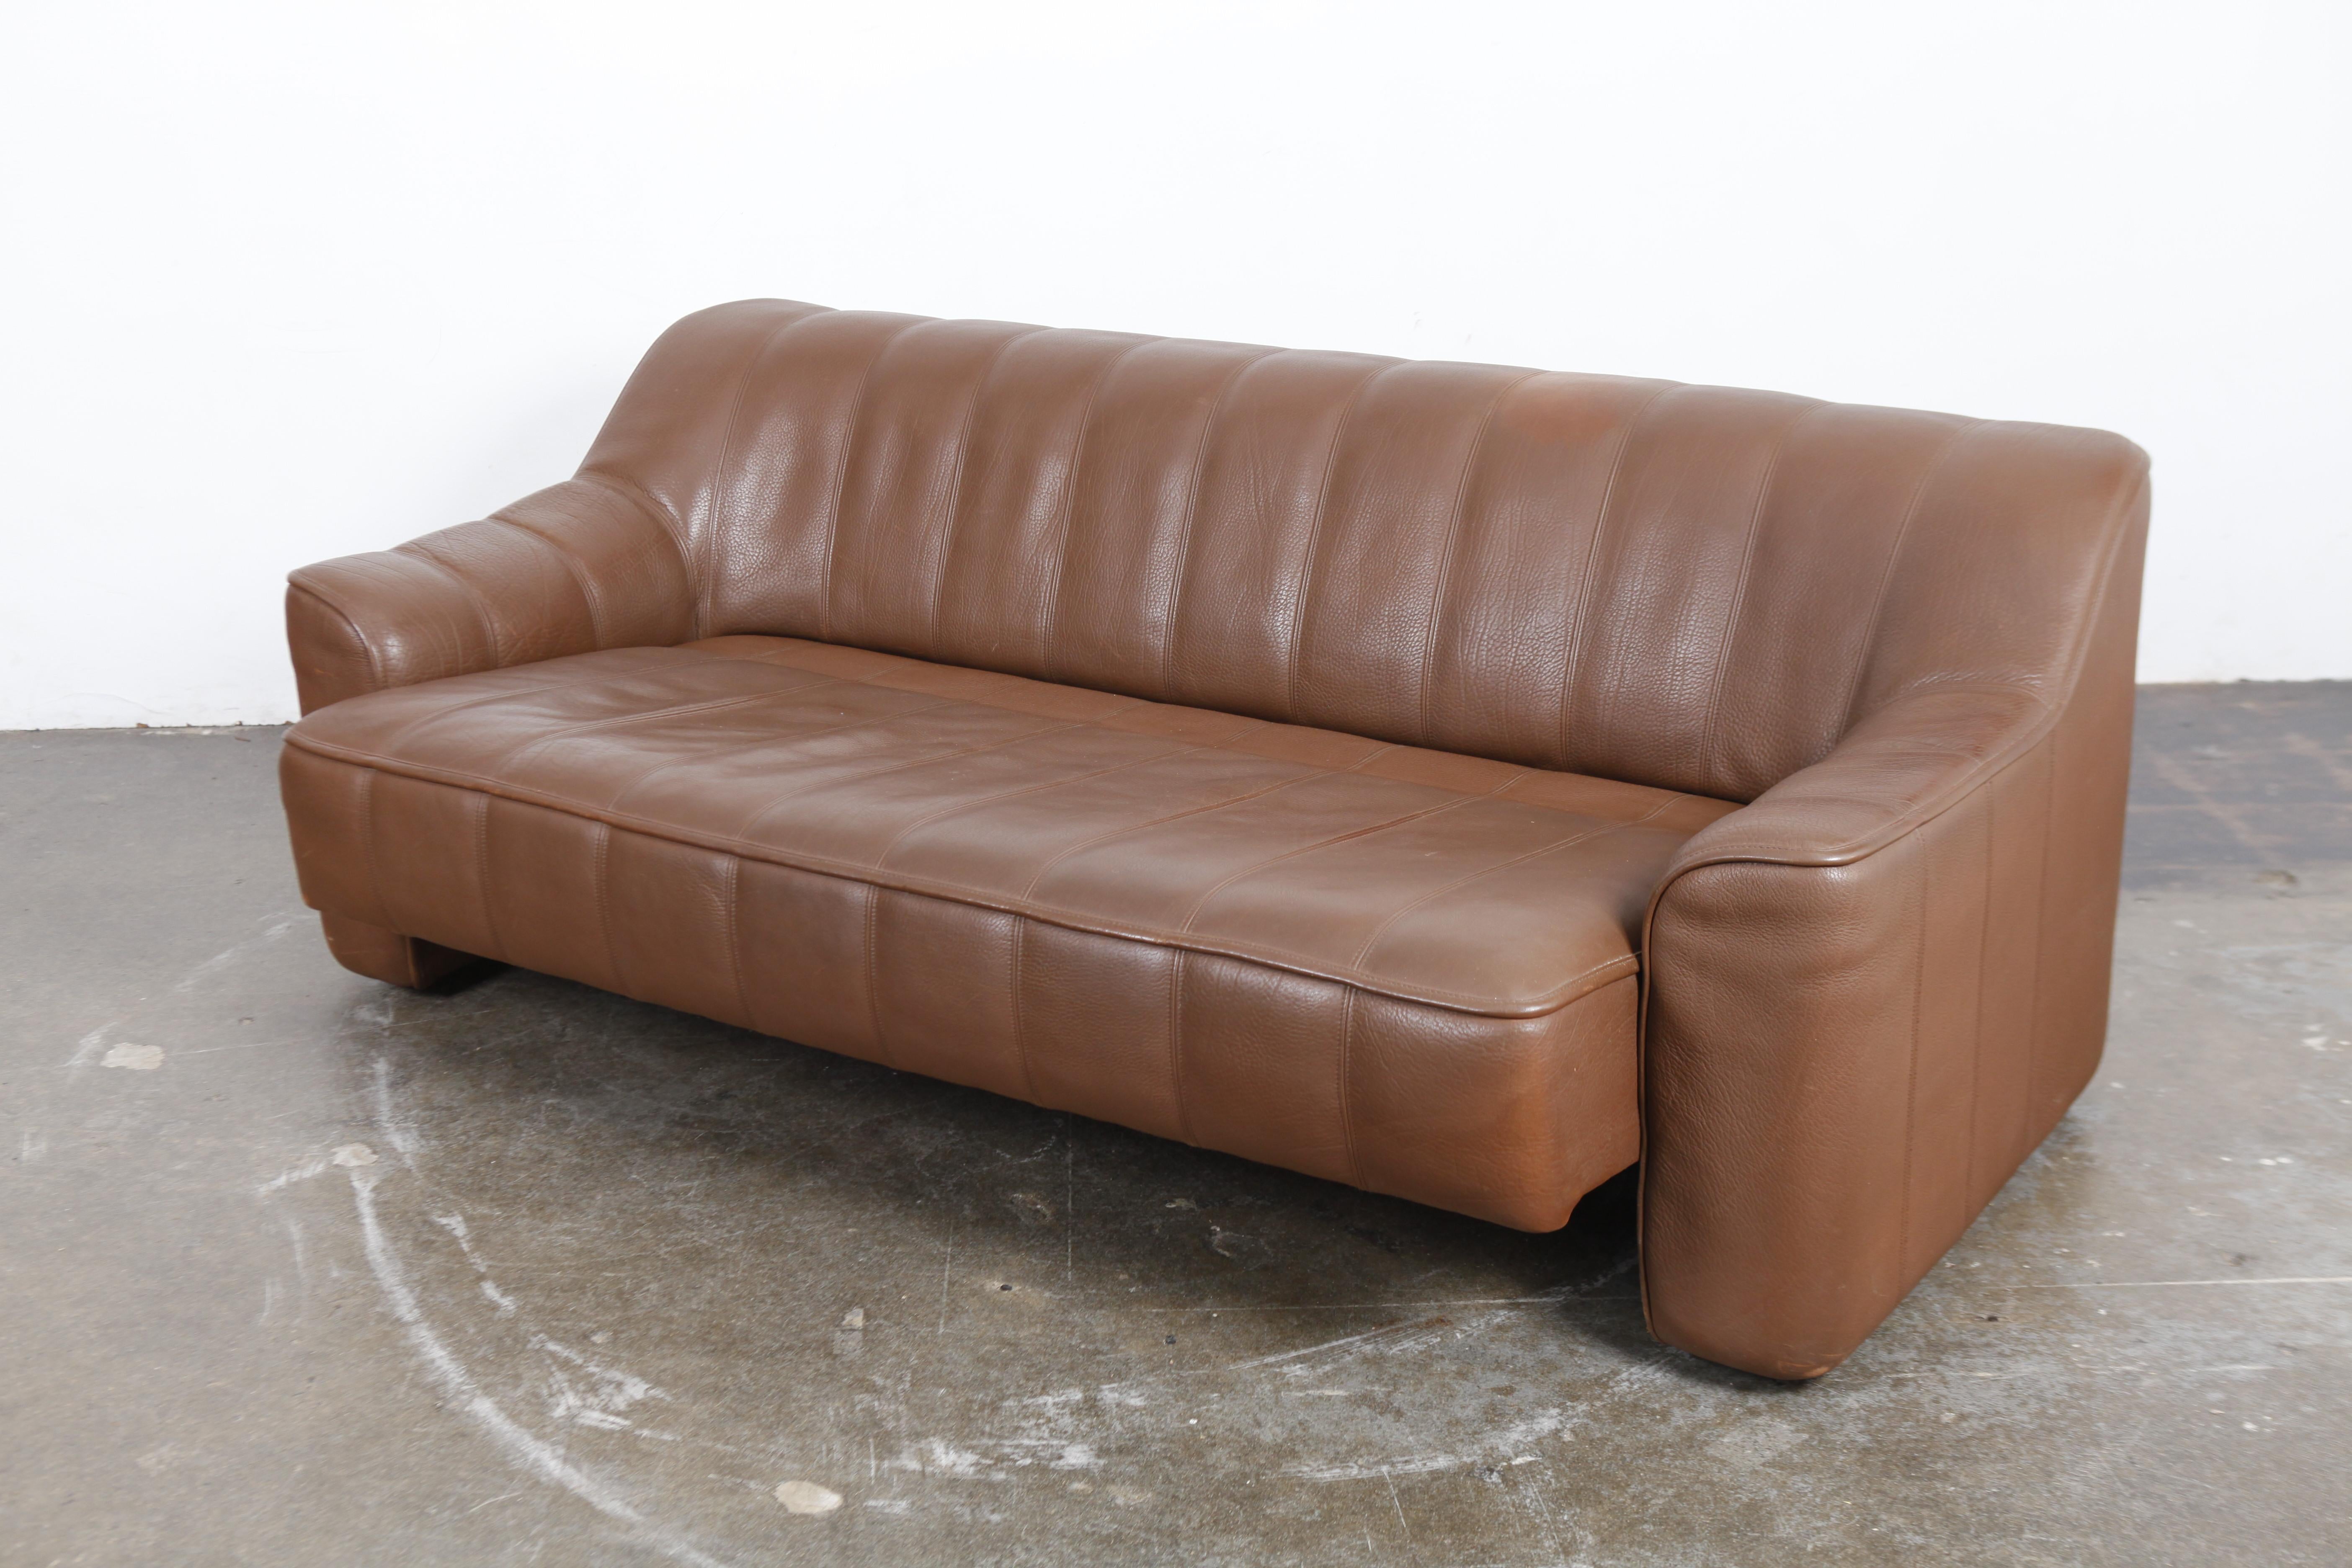 1970s De Sede Leather 3-Seat Sofa 'Model DS 44' from Switzerland For Sale 4